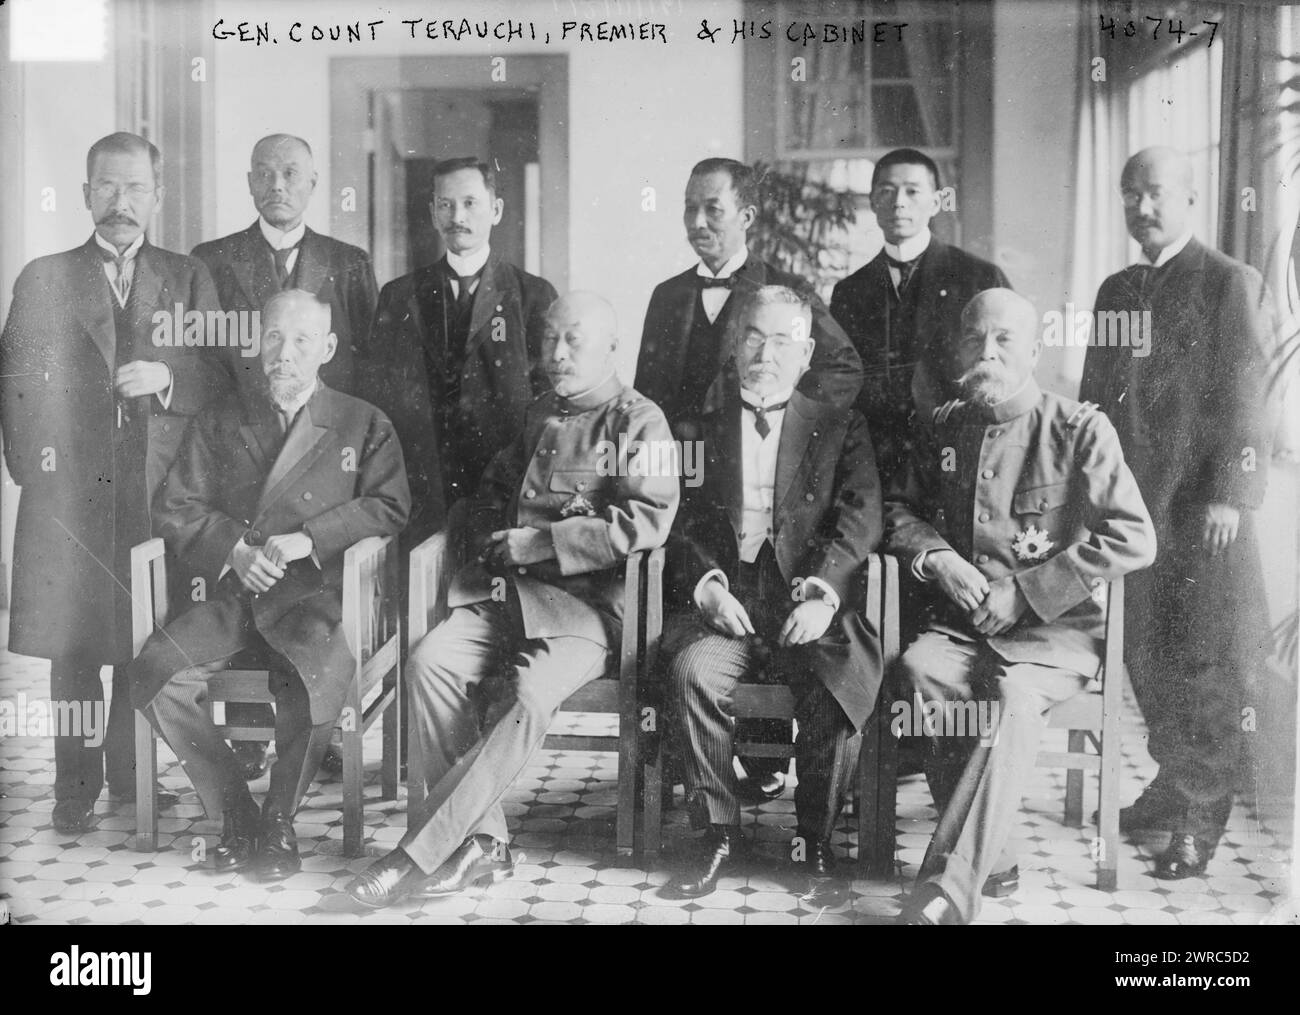 Gen. Count Terauchi, Premier and his Cabinet, Photograph shows politician and officer Count Terauchi Masatake (1852-1919) who was a Gensui (Marshal) in the Imperial Japanese Army and served as Prime Minister (1916-1918)., between ca. 1915 and ca. 1920, Glass negatives, 1 negative: glass Stock Photo